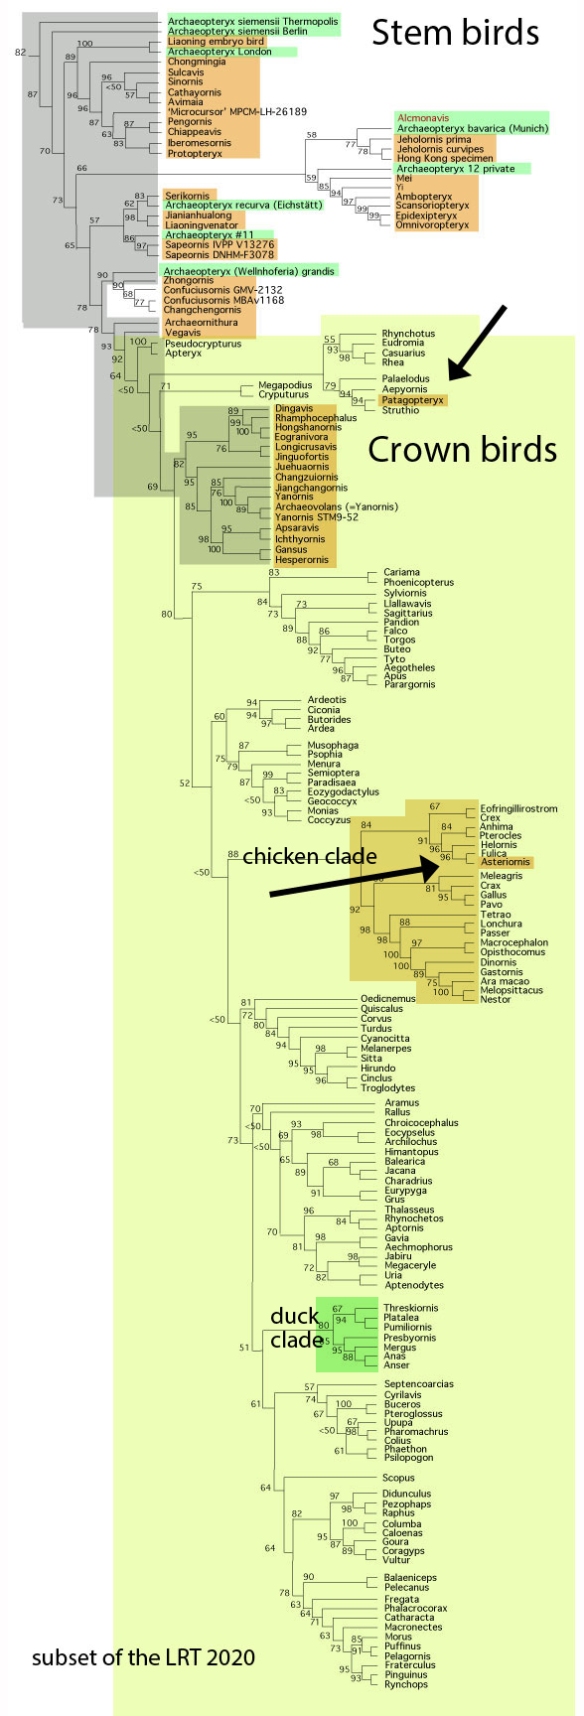 Figure 3. Subset of the LRT focusing on birds. Note the separation of the duck clade from the chicken clade.